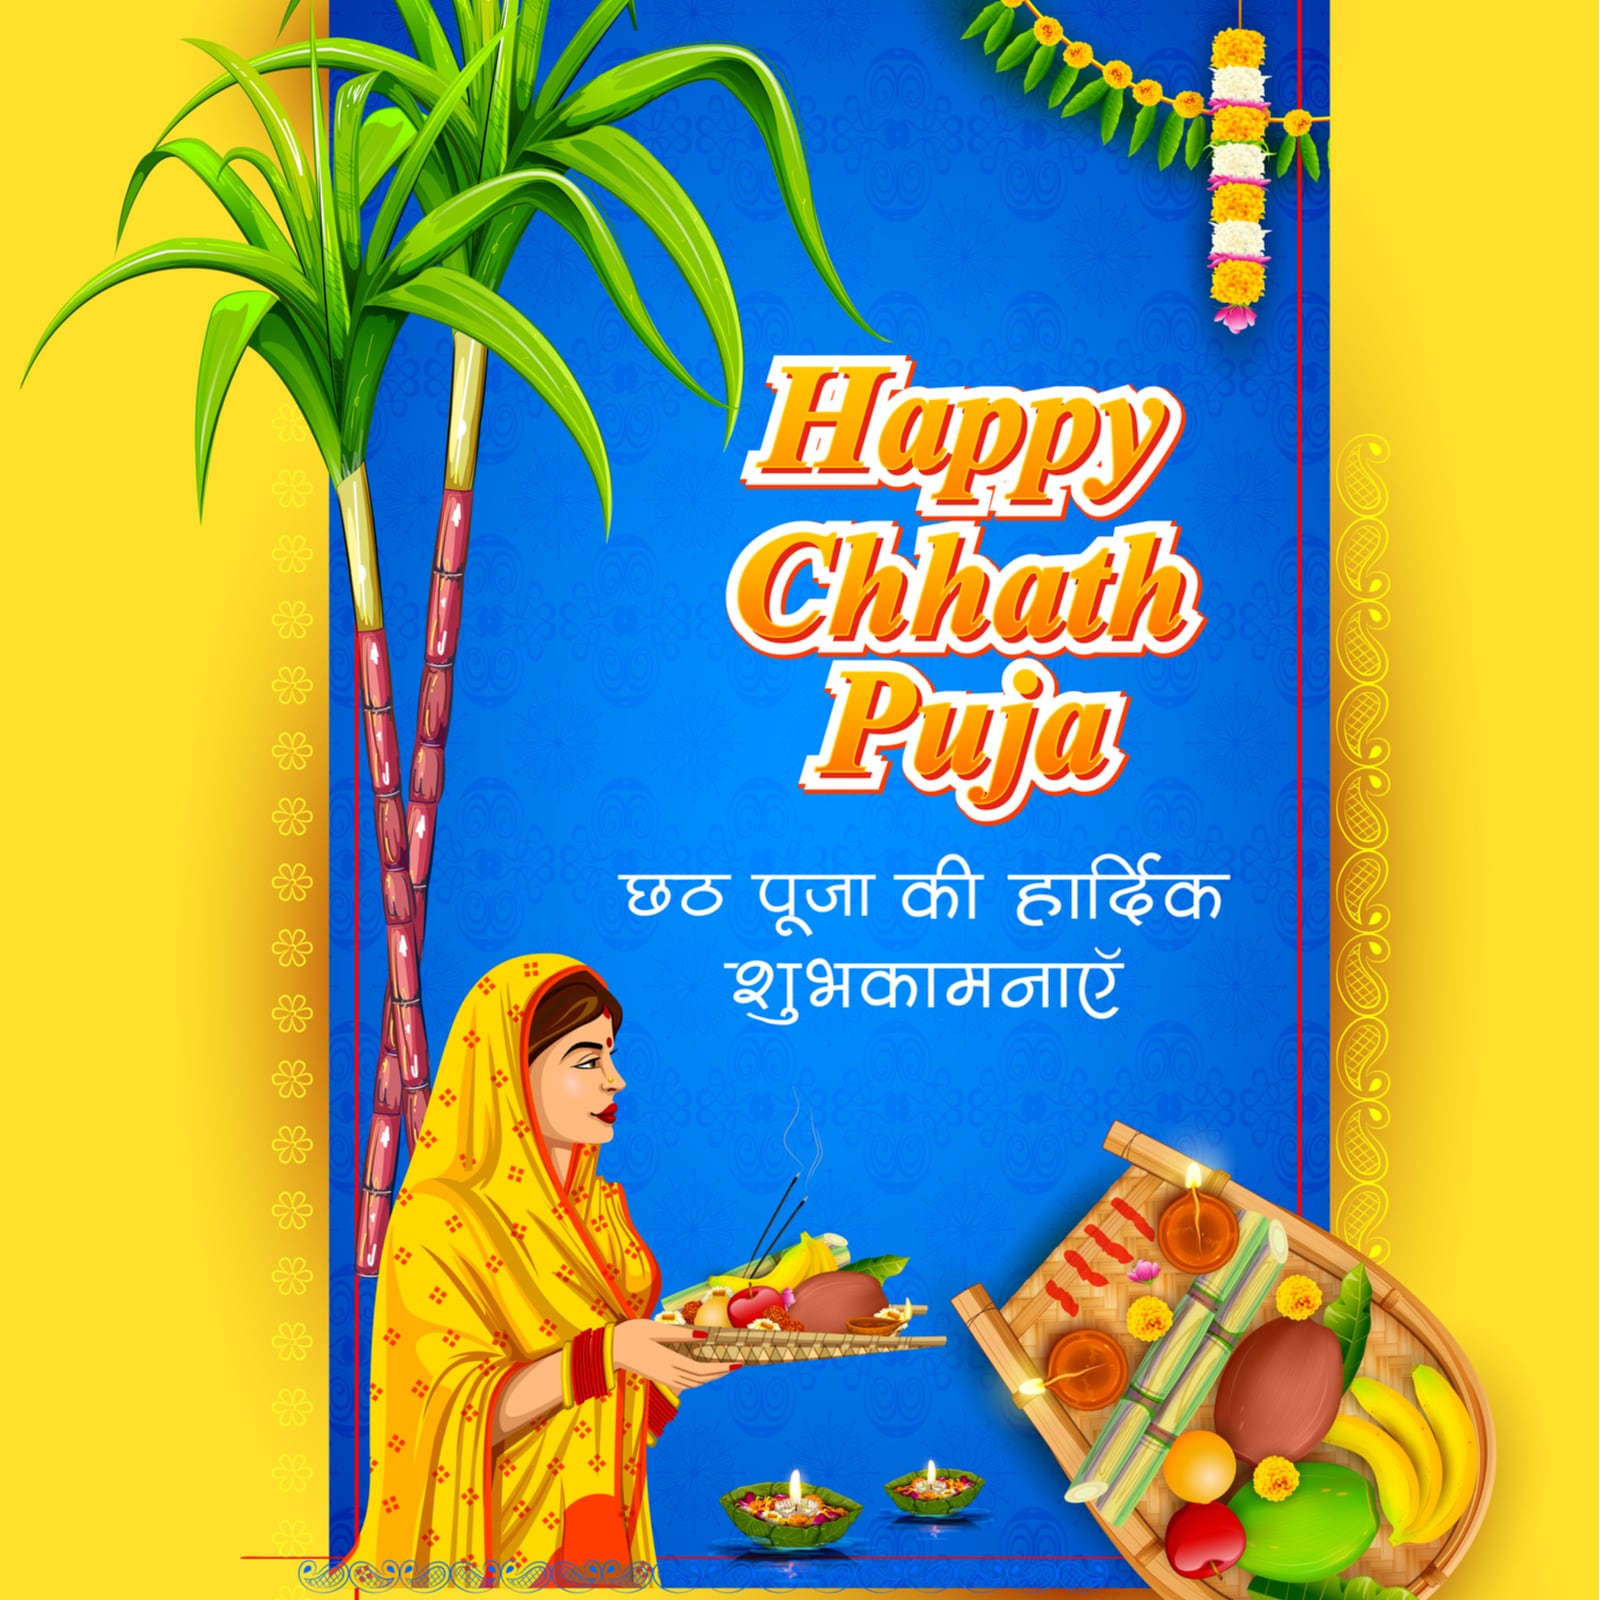 Happy Chhath Puja 2021: Images, Wishes, Quotes, Messages and WhatsApp  Greetings to Share with Your Loved Ones